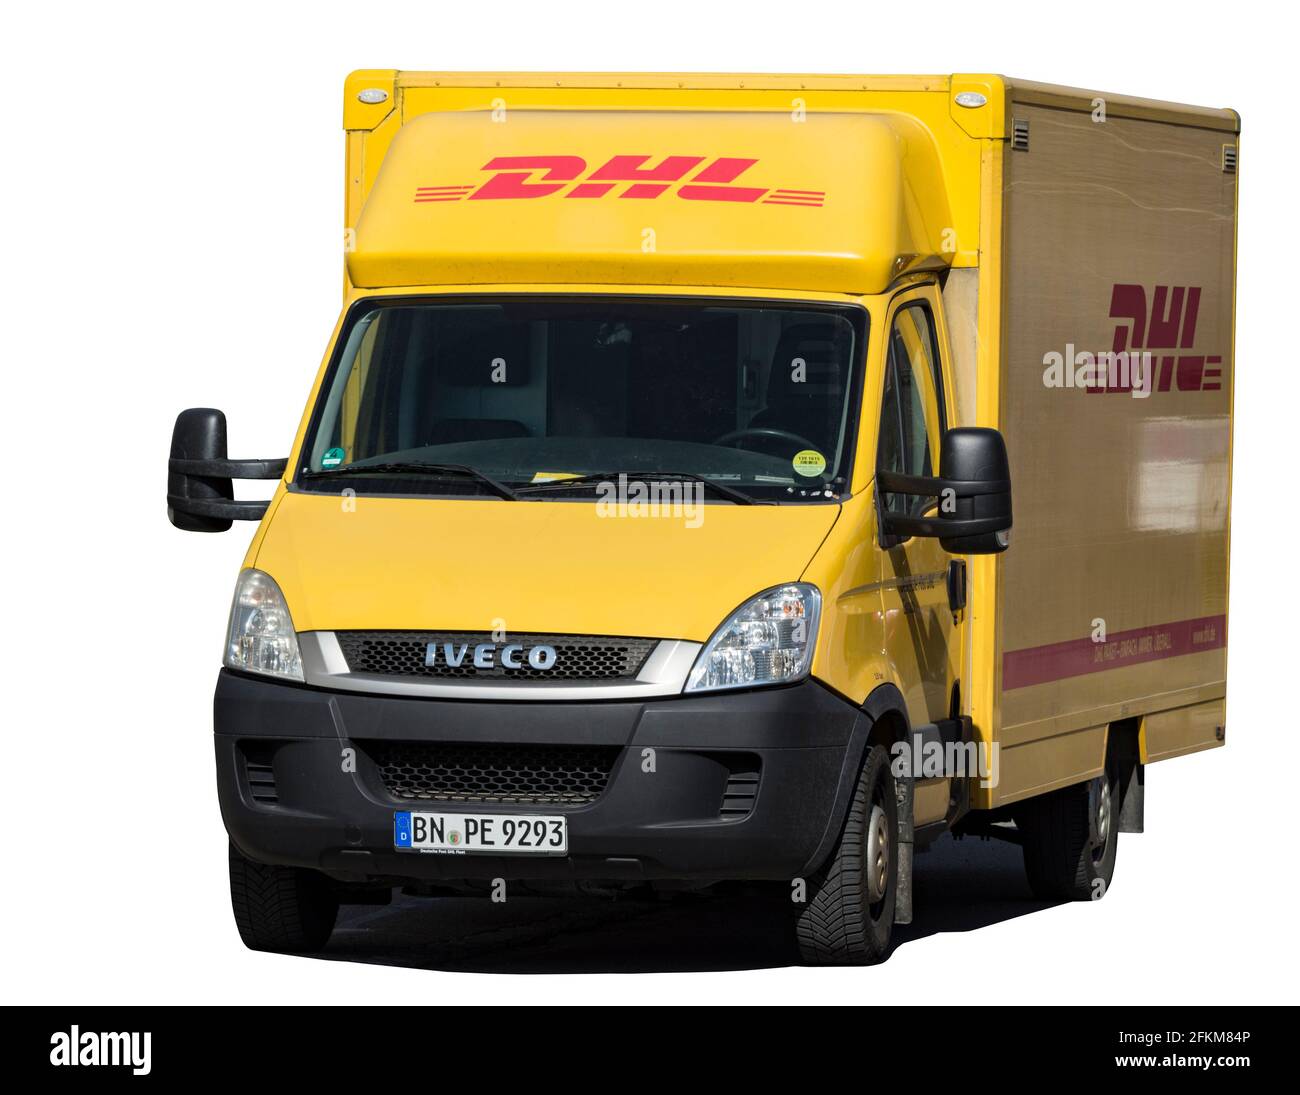 cut out of yellow DHL parcel delivery vehicle Stock Photo